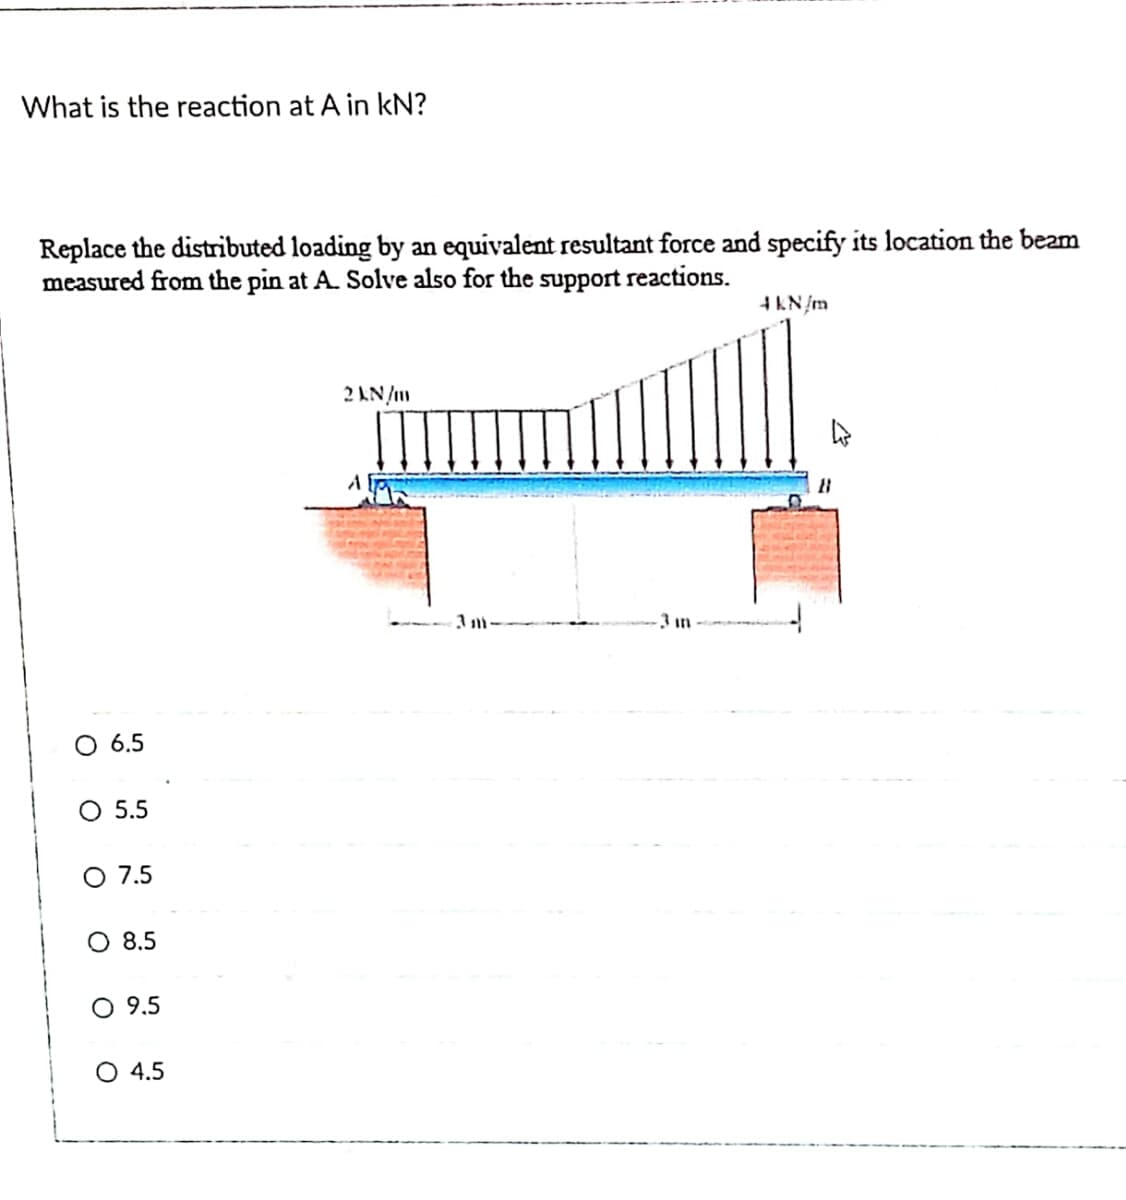 What is the reaction at A in kN?
Replace the distributed loading by an equivalent resultant force and specify its location the beam
measured from the pin at A. Solve also for the support reactions.
4KN/m
2 AN/
O 6.5
O 5.5
O 7.5
O 8.5
O 9.5
O 4.5
